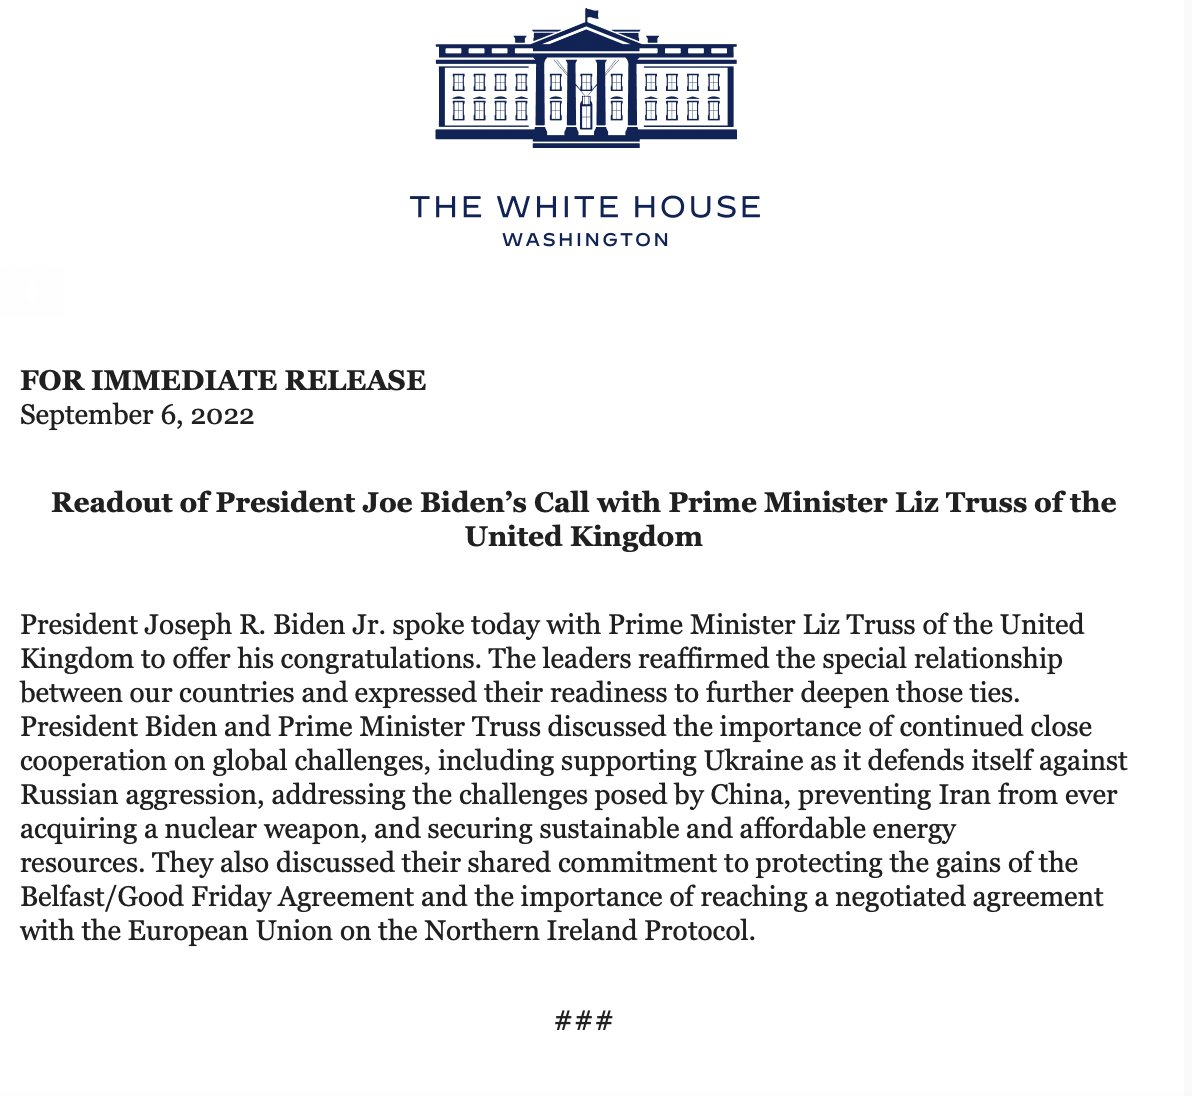 Readout of call between @POTUS and @trussliz today, with Iran featuring in the discussions